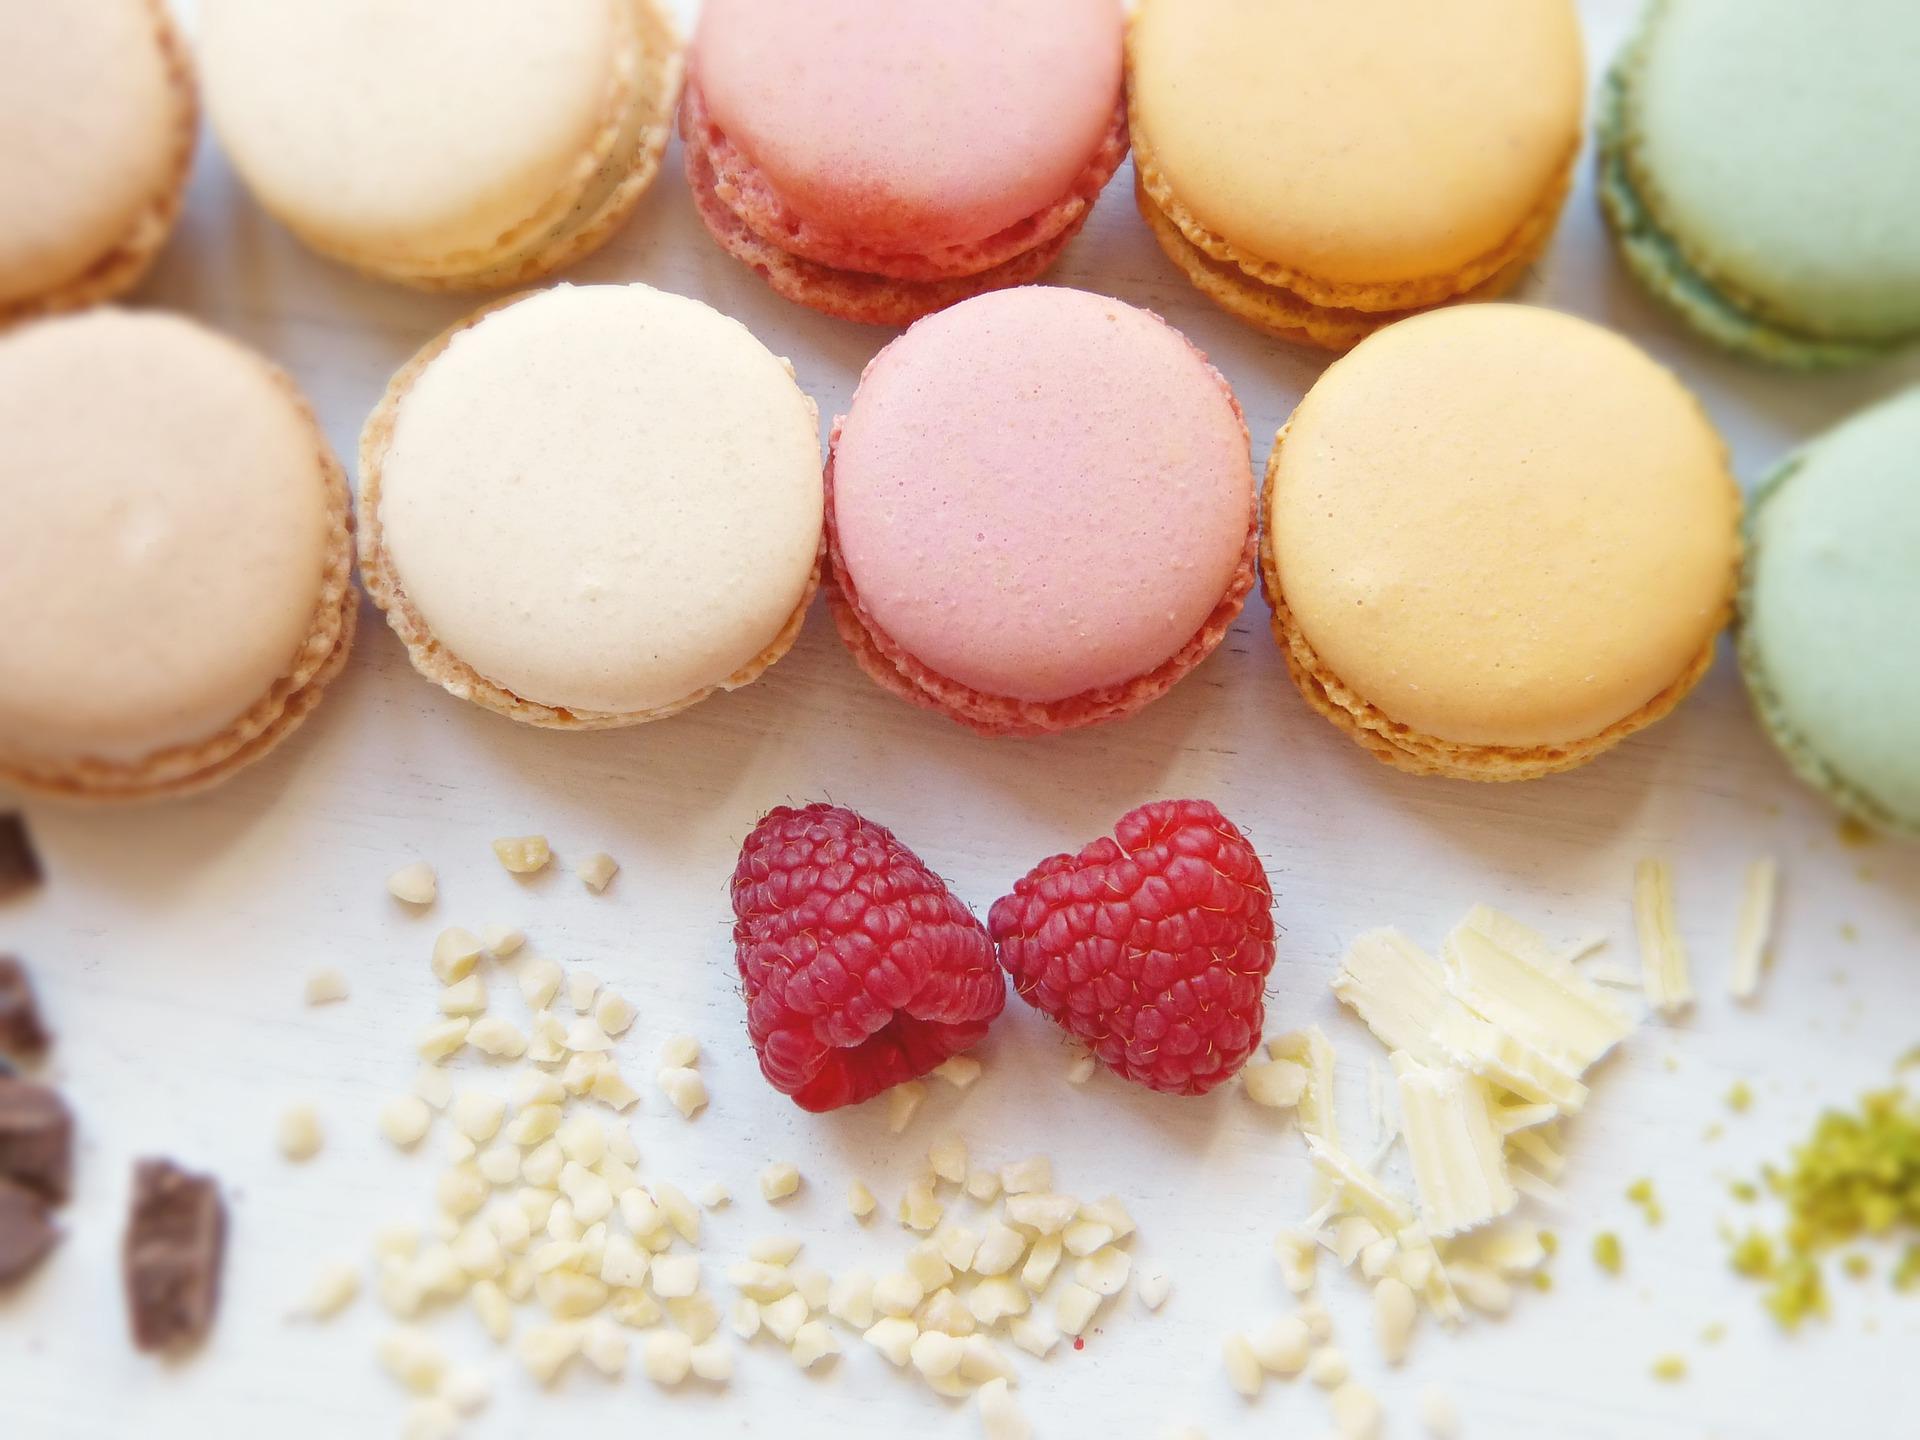 Ten pieces of macaroons with five different colors sitting beside two cherries